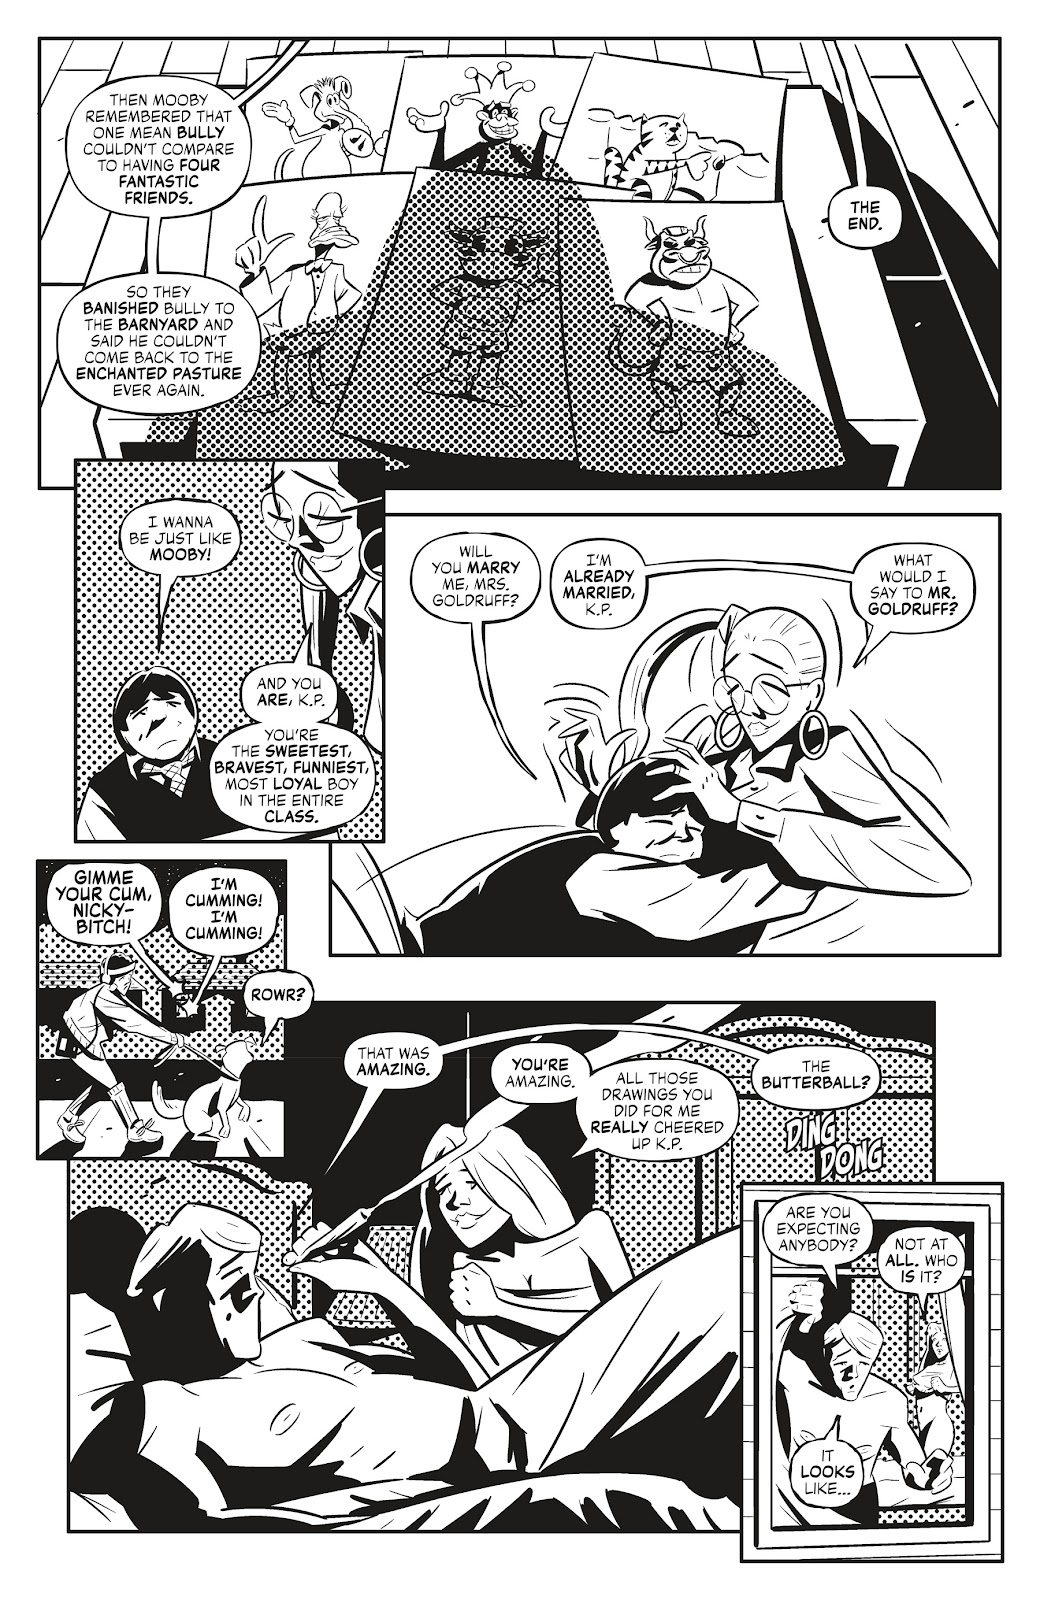 Quick Stops Vol. 2 issue 1 - Page 14